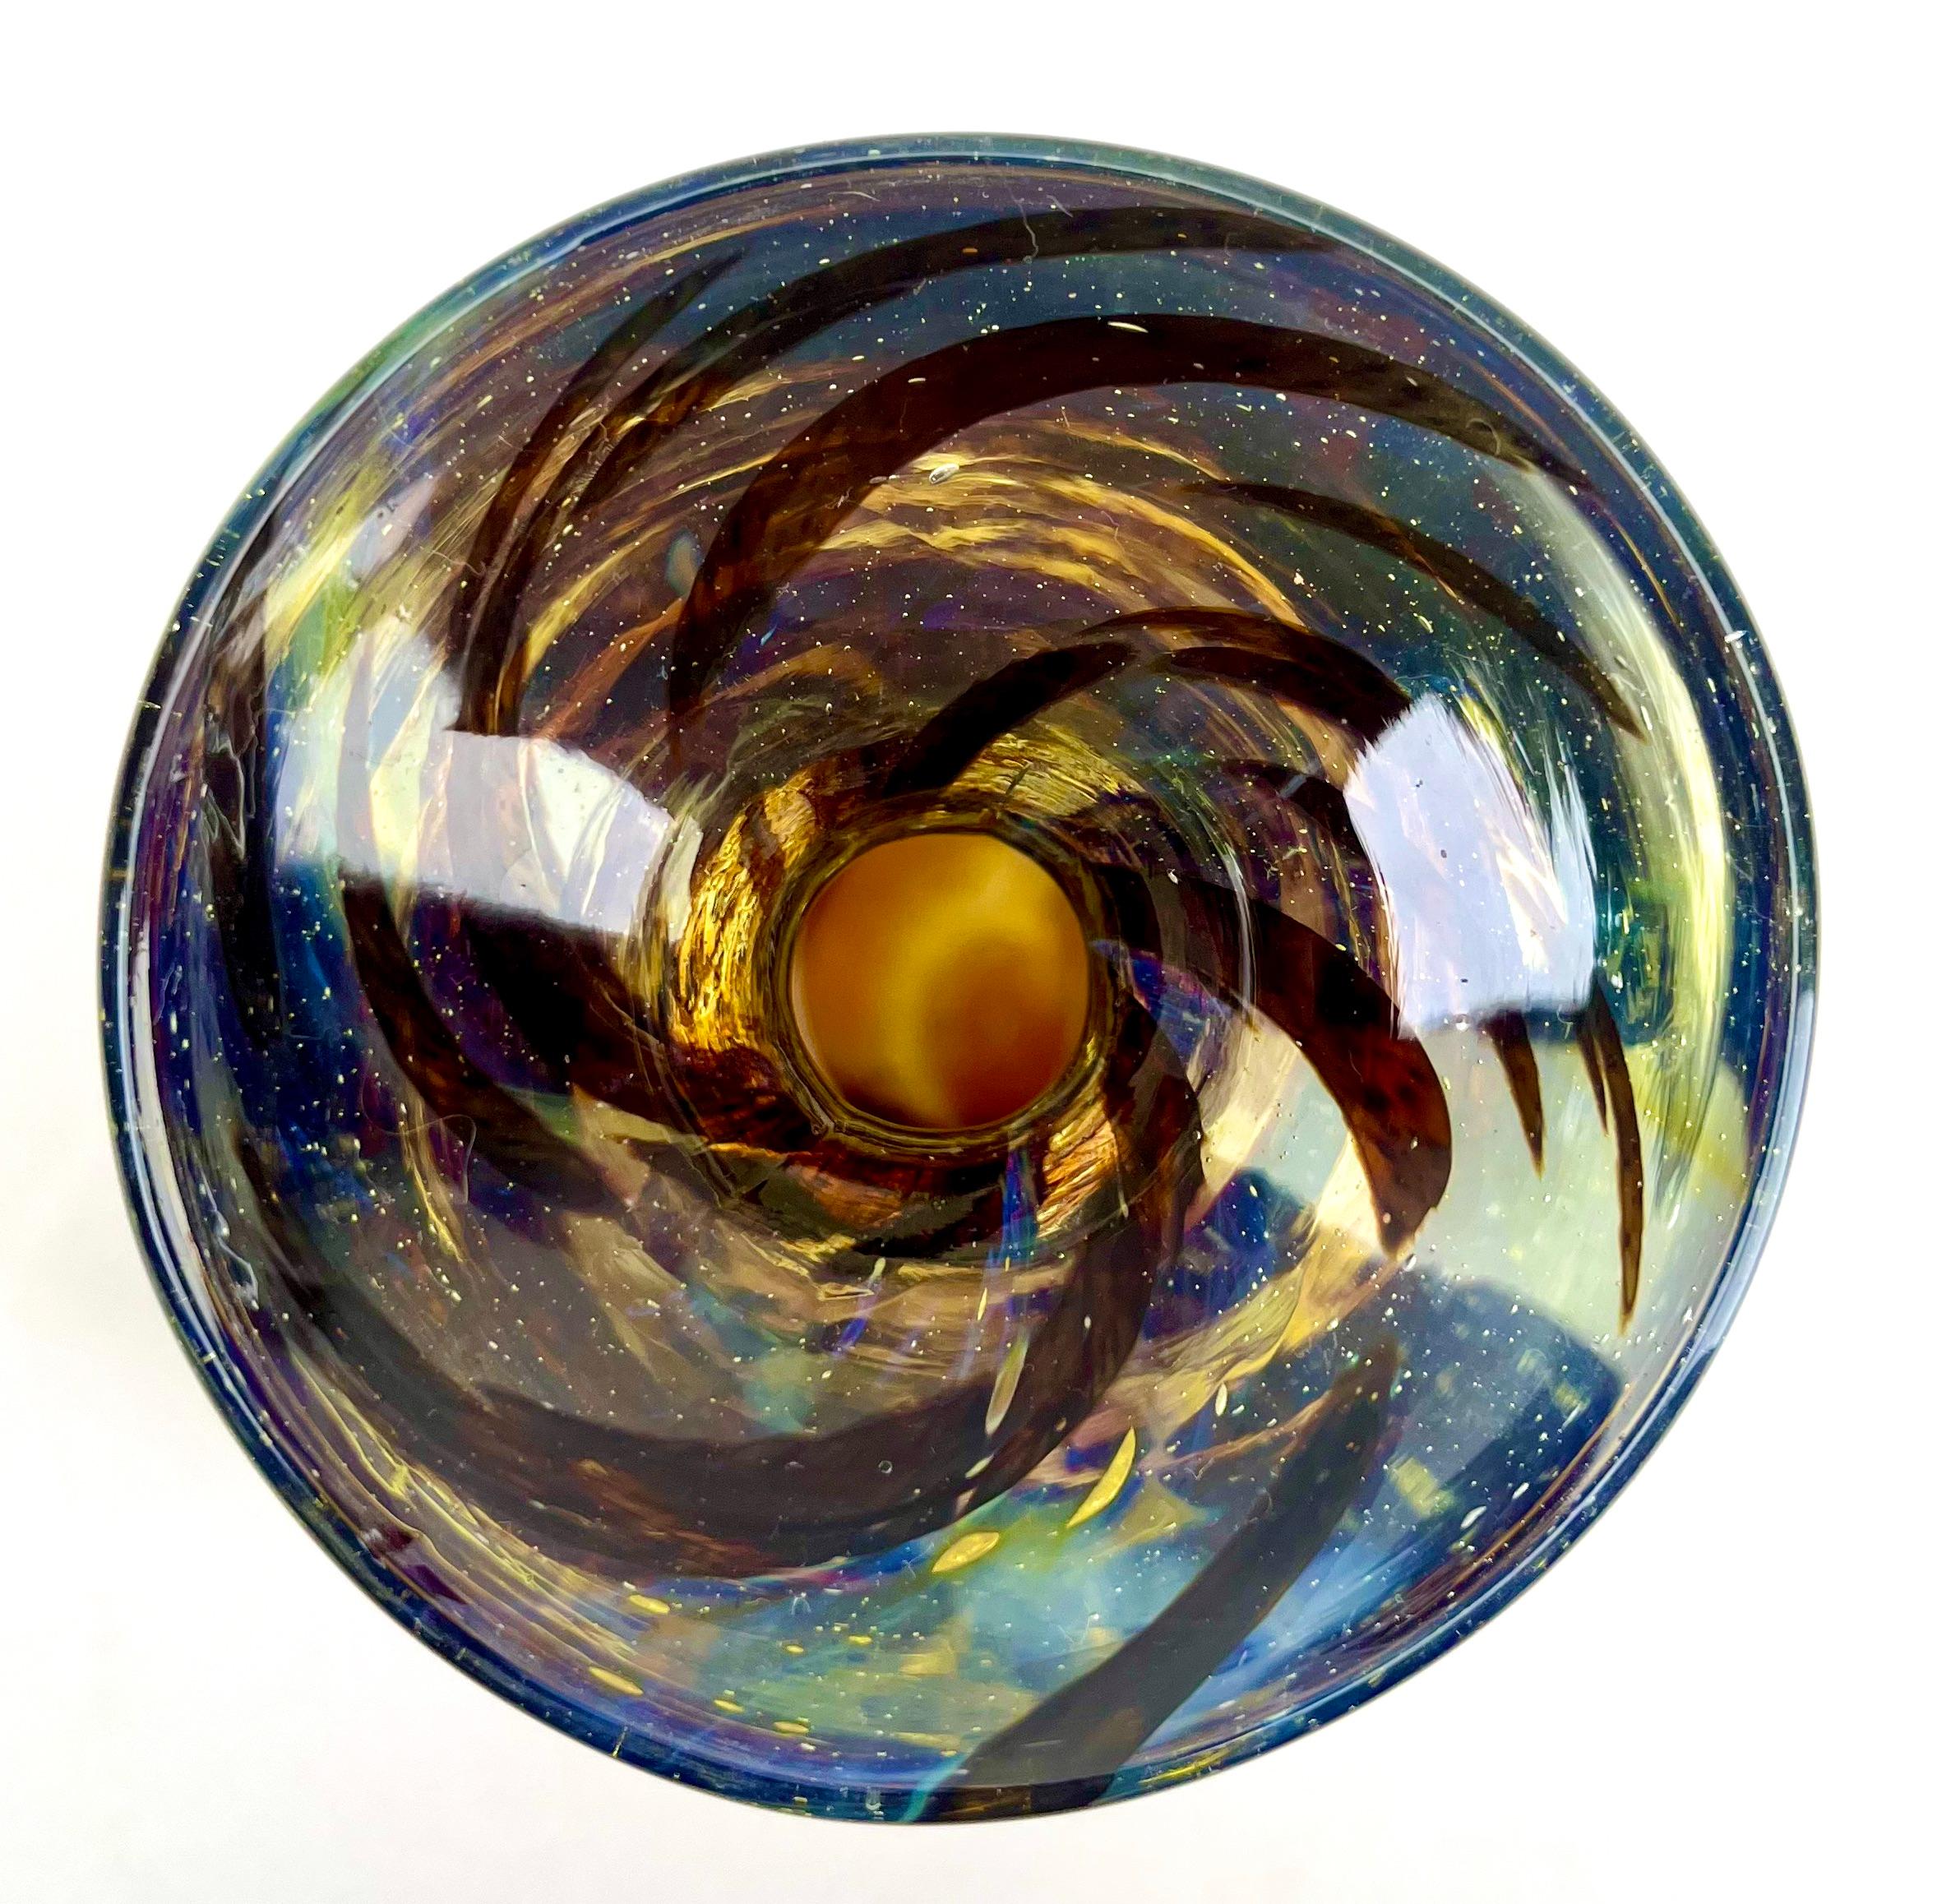 Art Glass Vase, Style of WMF in Germany, 1950s Style Karl Wiedmann
German glass bowl style of Karl Wiedmann, 1950s 

A decorative glass vase, style of WMF (Wurttembergische Metallwarenfabrik) in Germany.

The piece is in excellent condition and